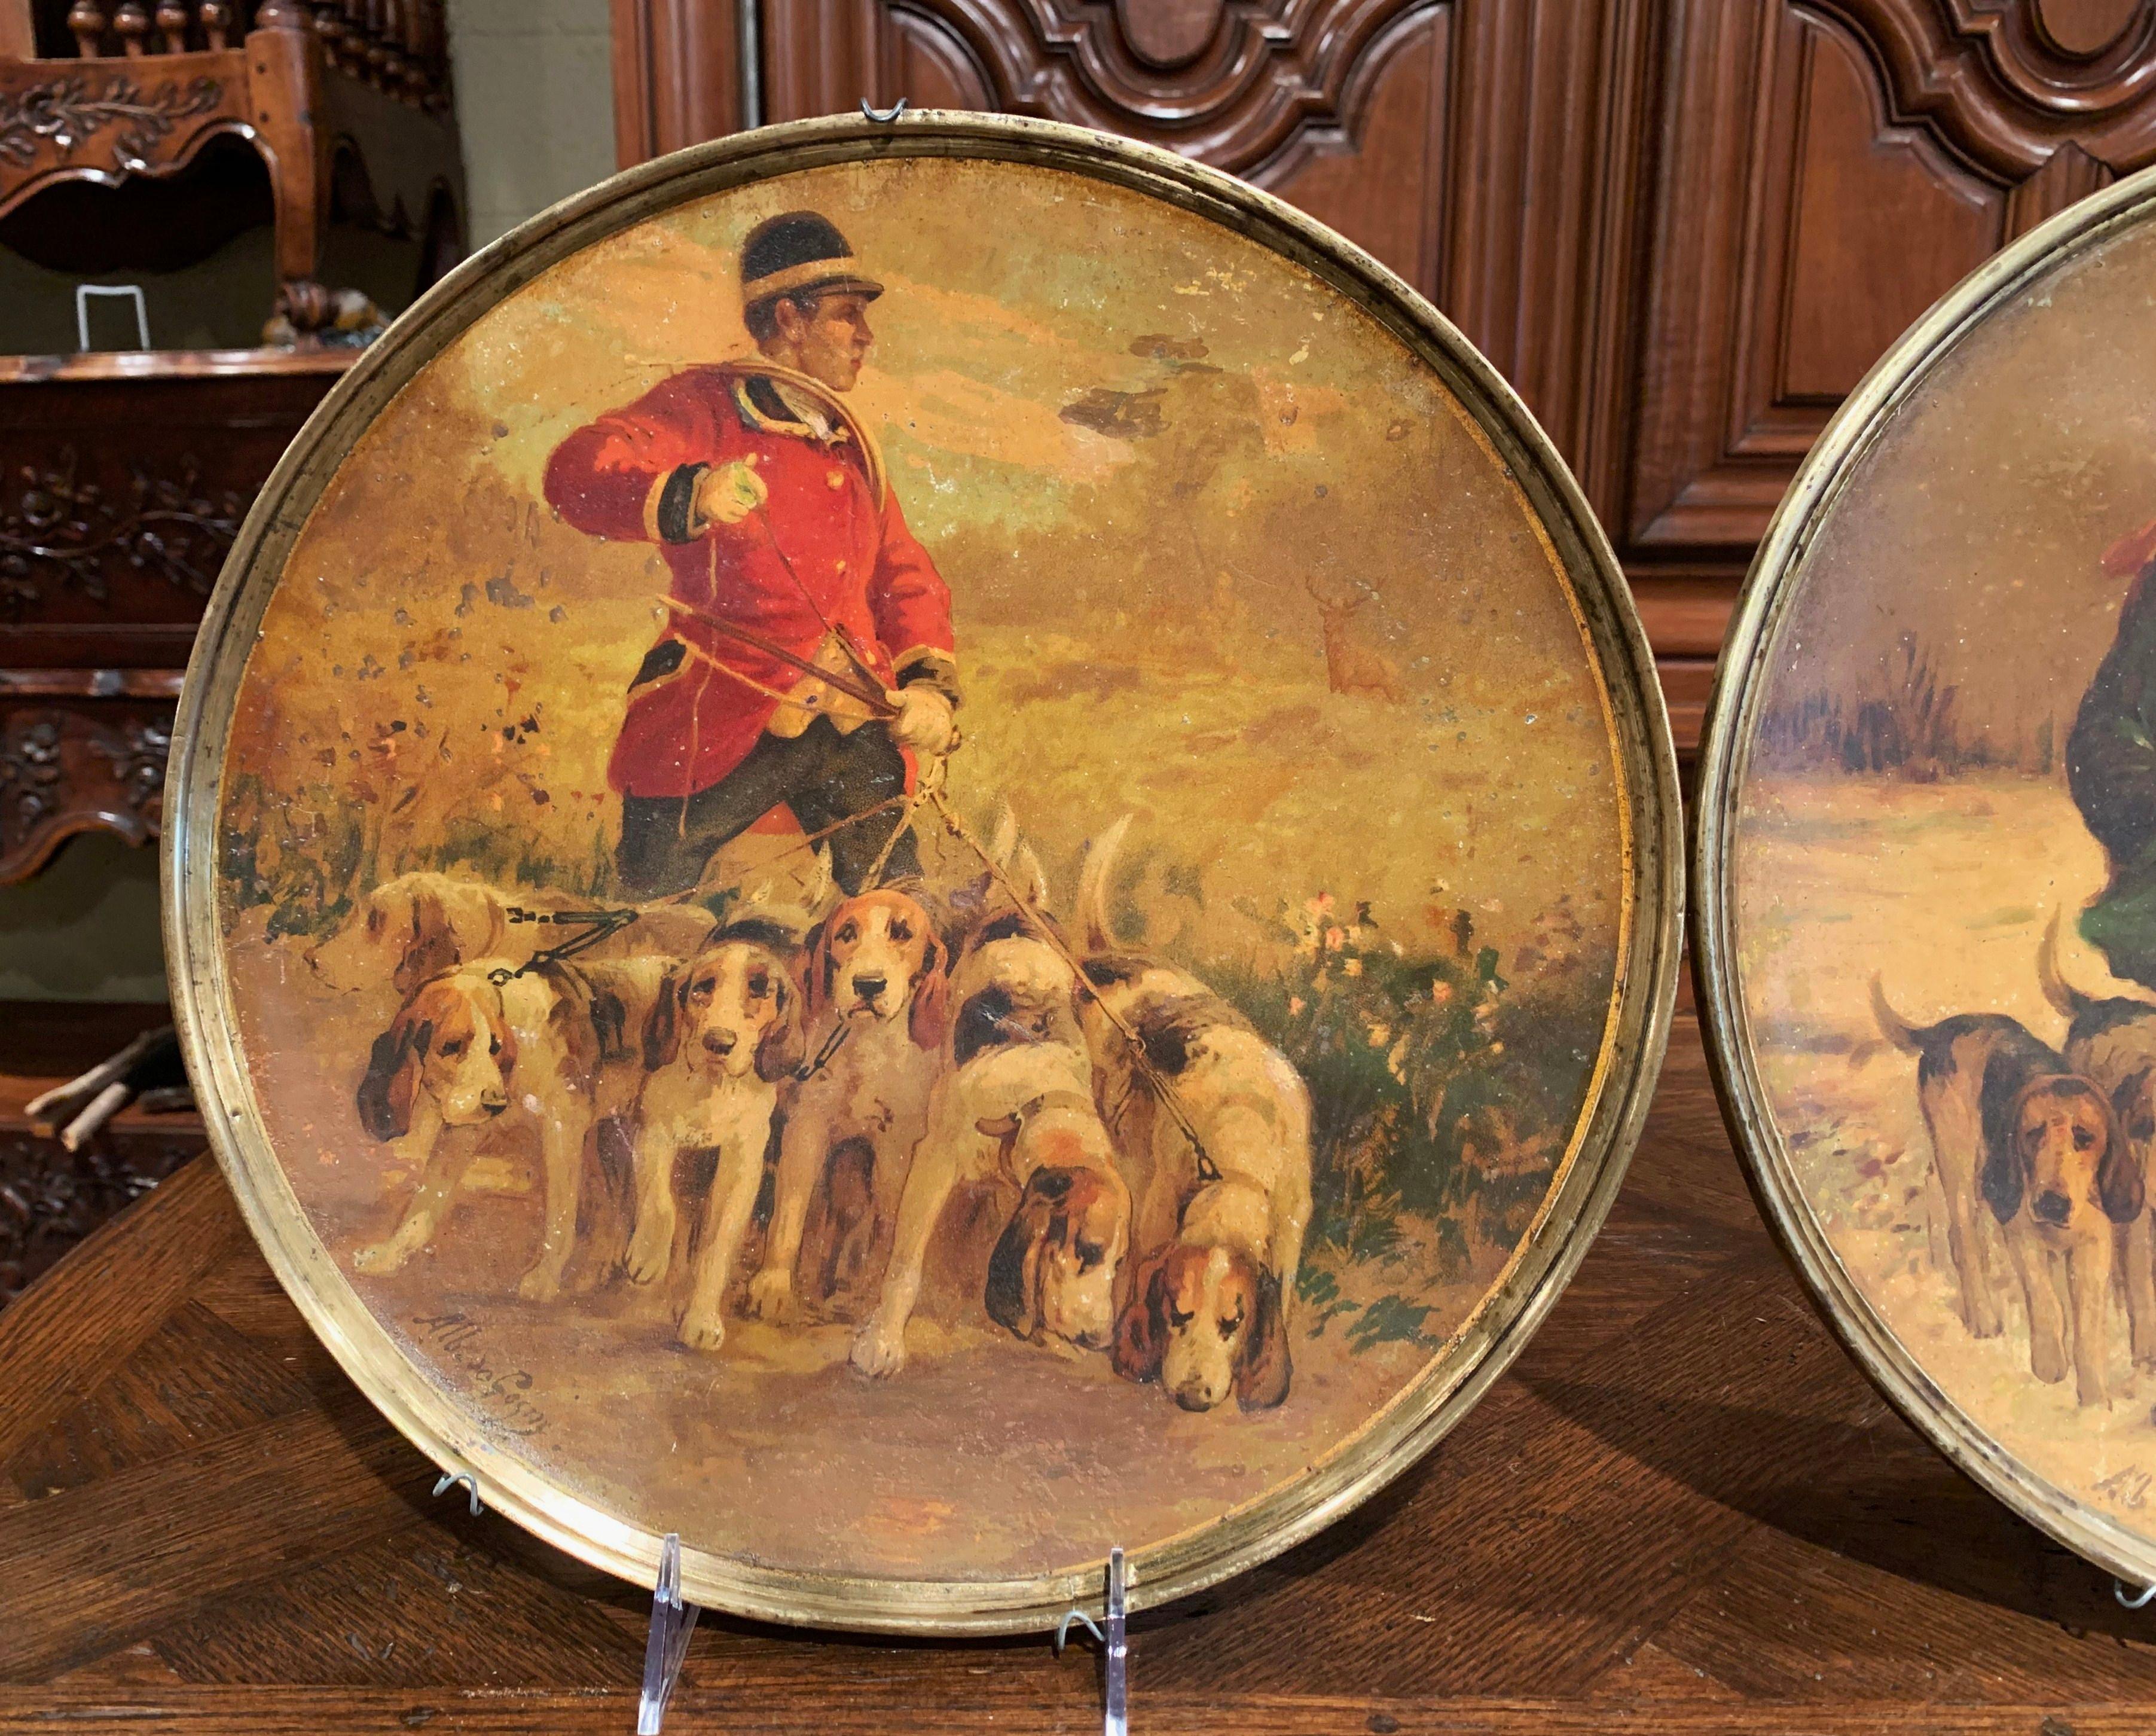 Bring color to a wall with this pair of antique hanging plaques. Created in France, circa 1880, each round metal plate with brass edge, depicts a hunt scene with hunter and dogs. Both art work are signed by the artist Albert de Gesne. The colorful